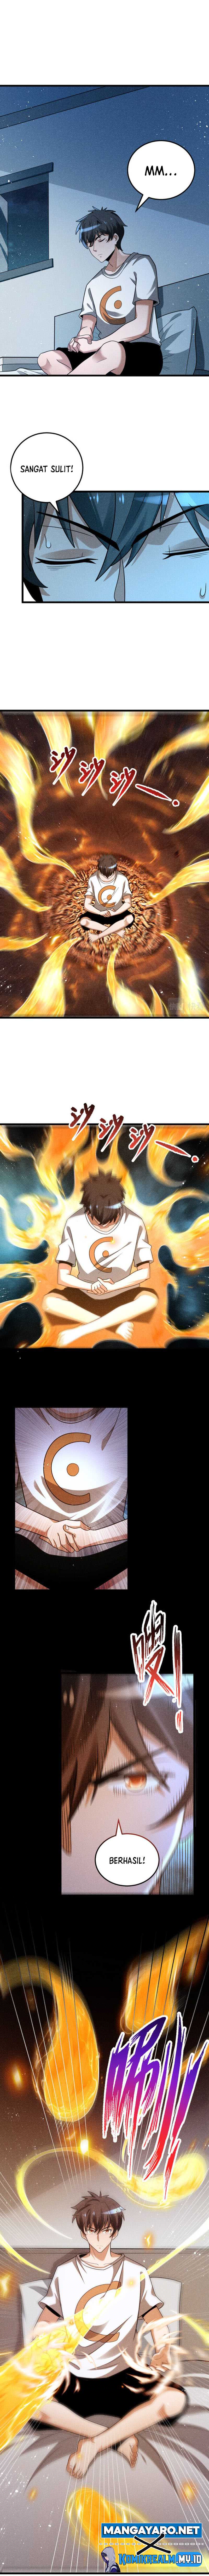 Due To Outburst Of Spiritual Energy, I Have No Choice But To Awaken As A God Chapter 05